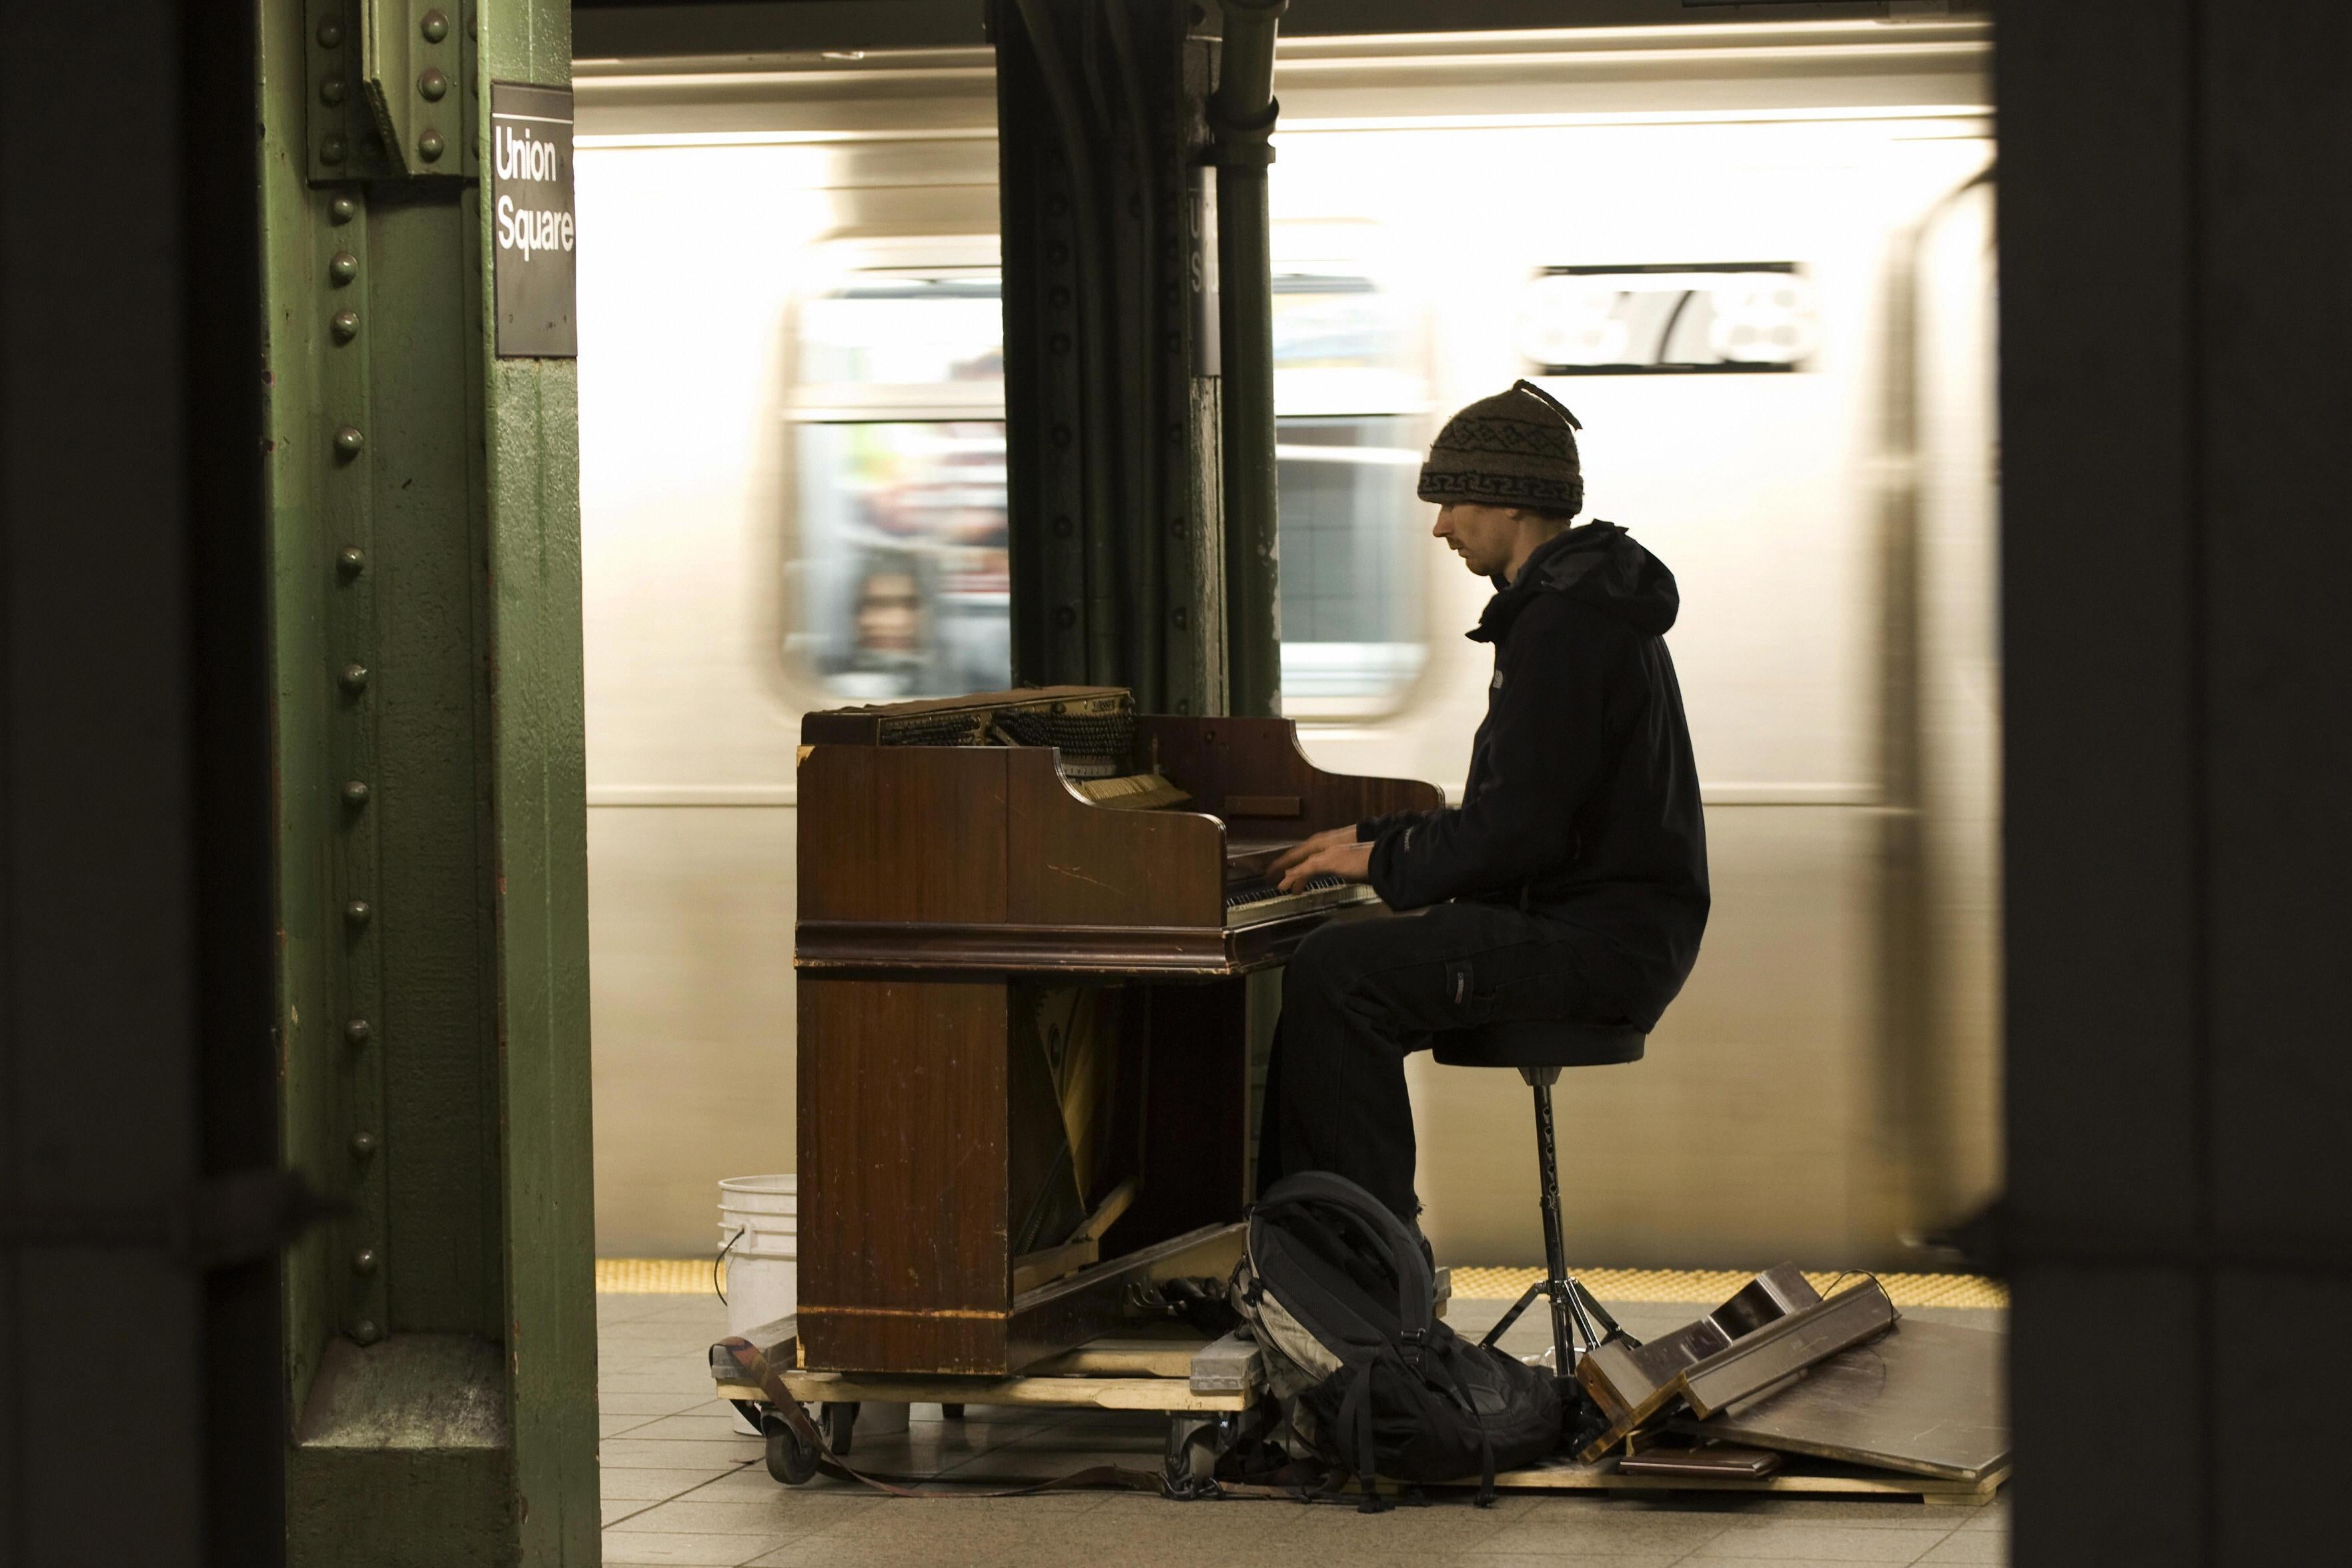 Pianist Colin Huggins plays for subway riders at the Union Square station.